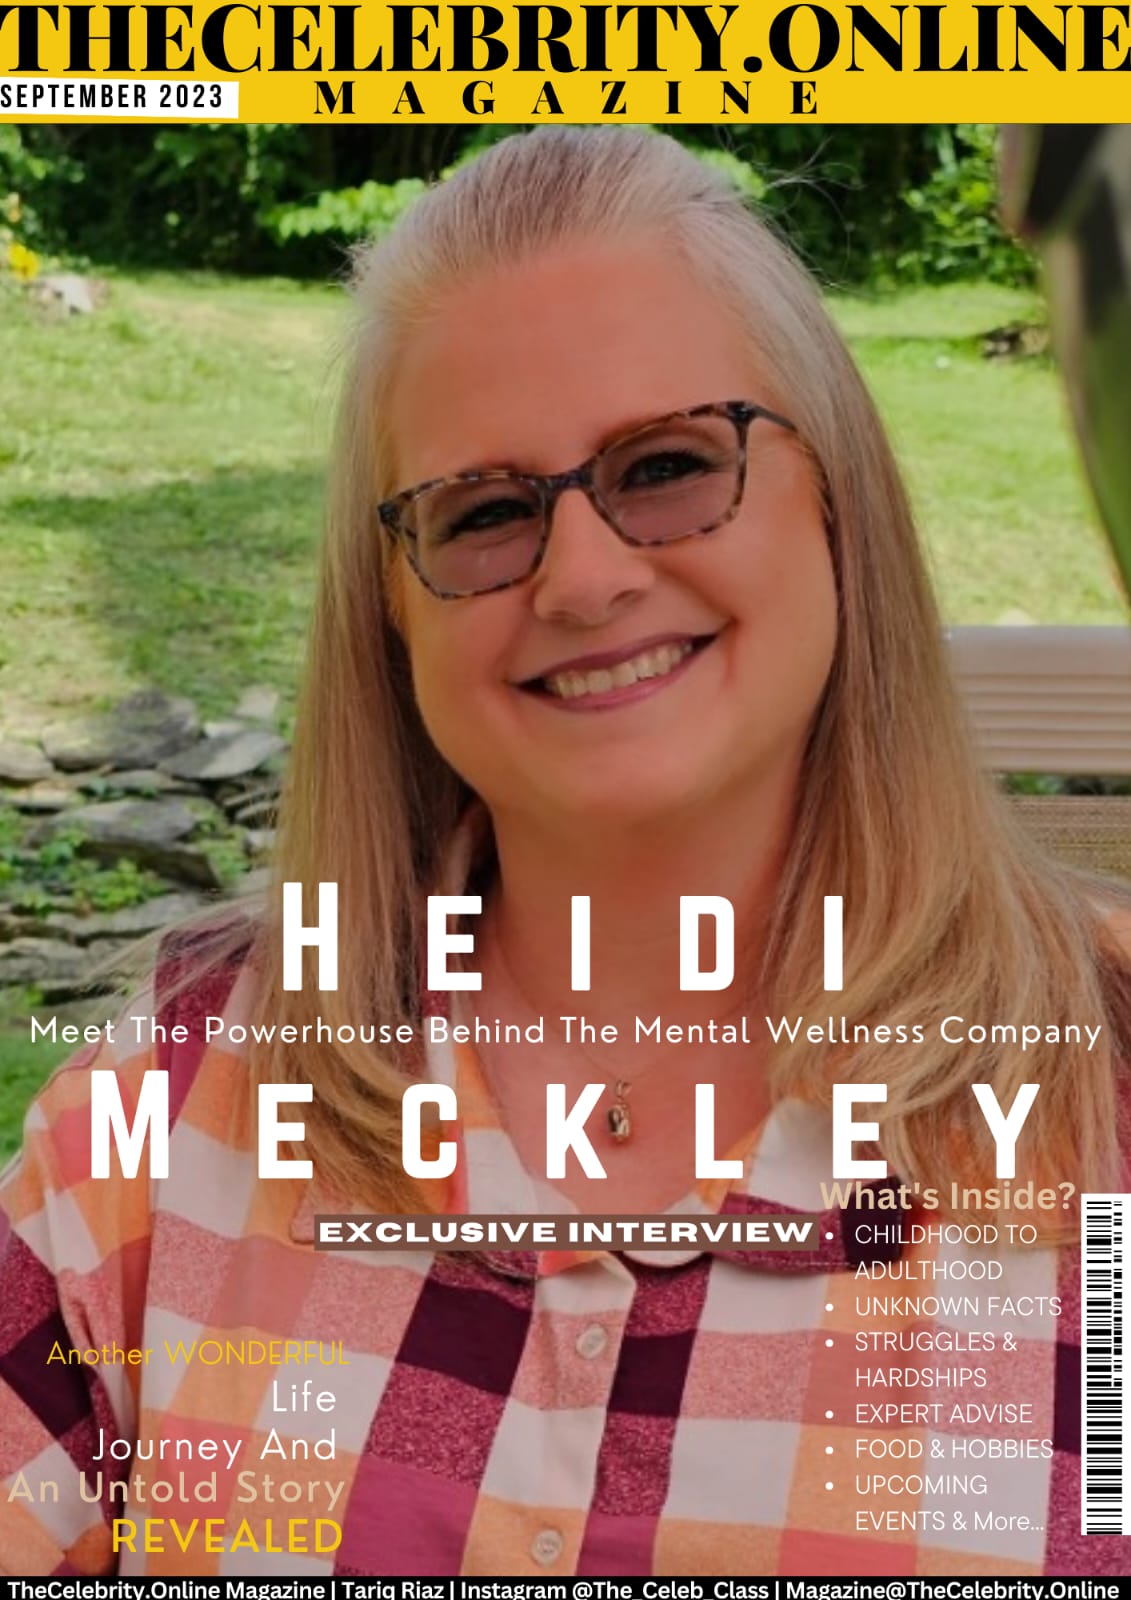 Heidi Meckley Exclusive Interview – ‘Follow The Pull And Dreams You Have Because It Will Lead To Amazing Things’